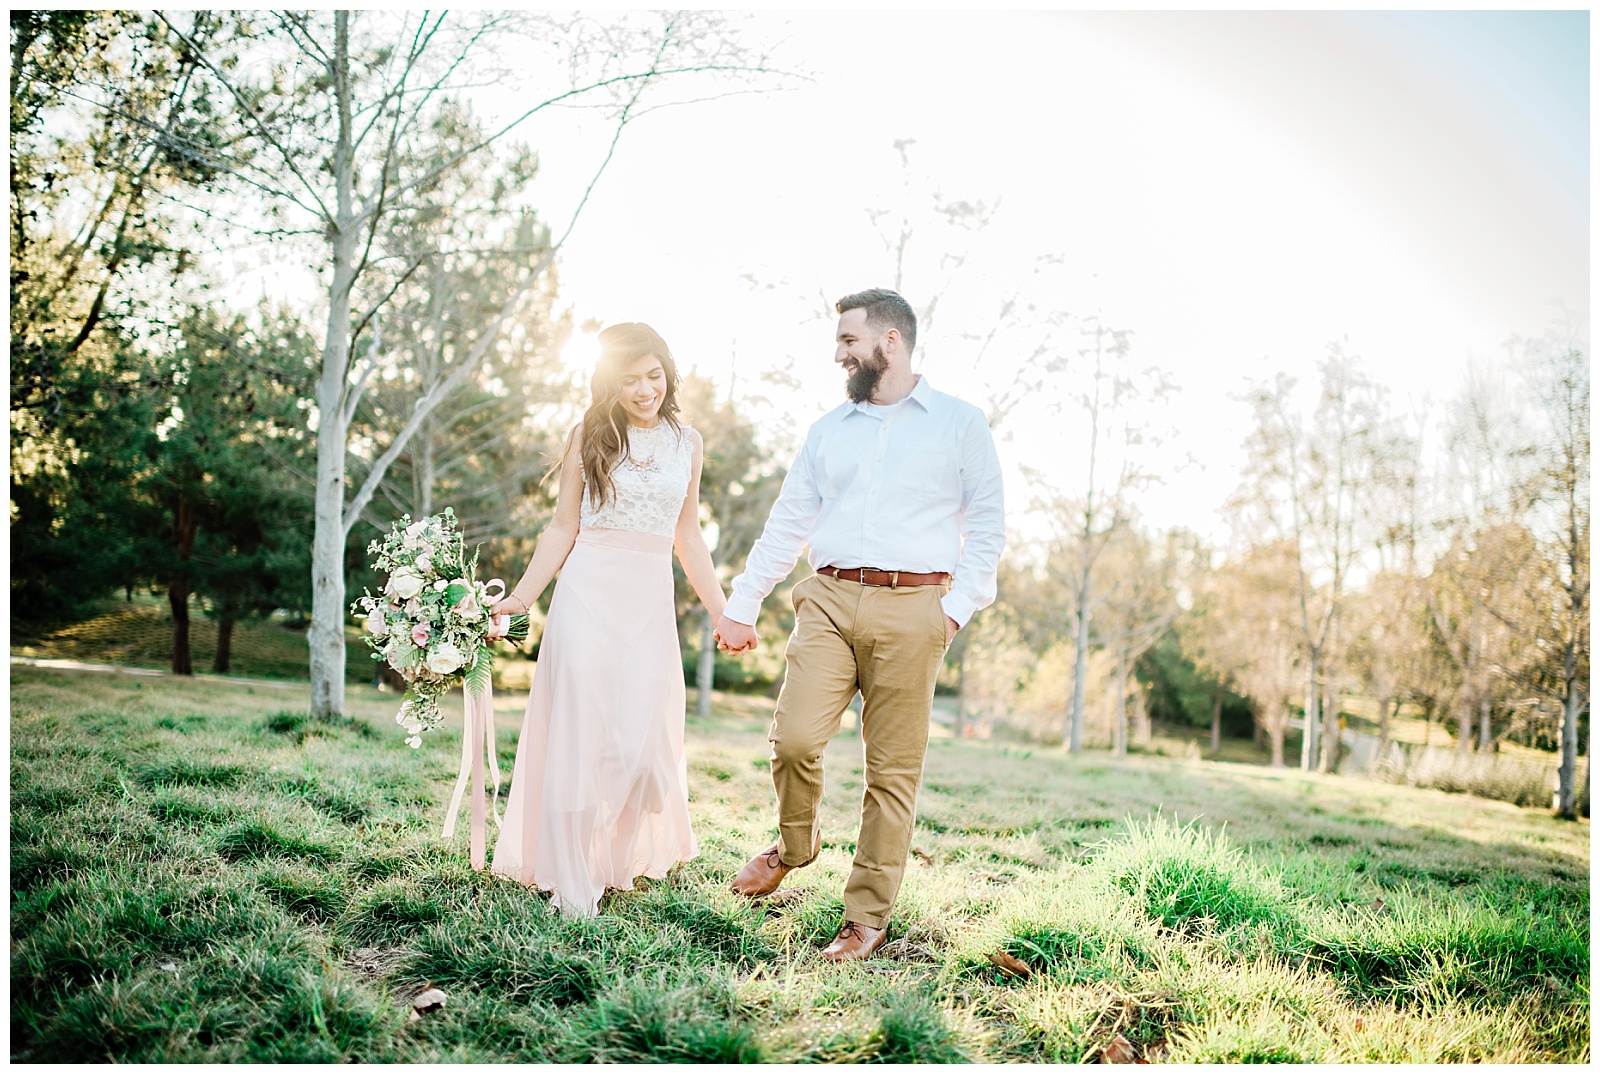 Styled Orange County Engagement Session by Mollie Jane Photography. To see more go to www.molliejanephotography.com